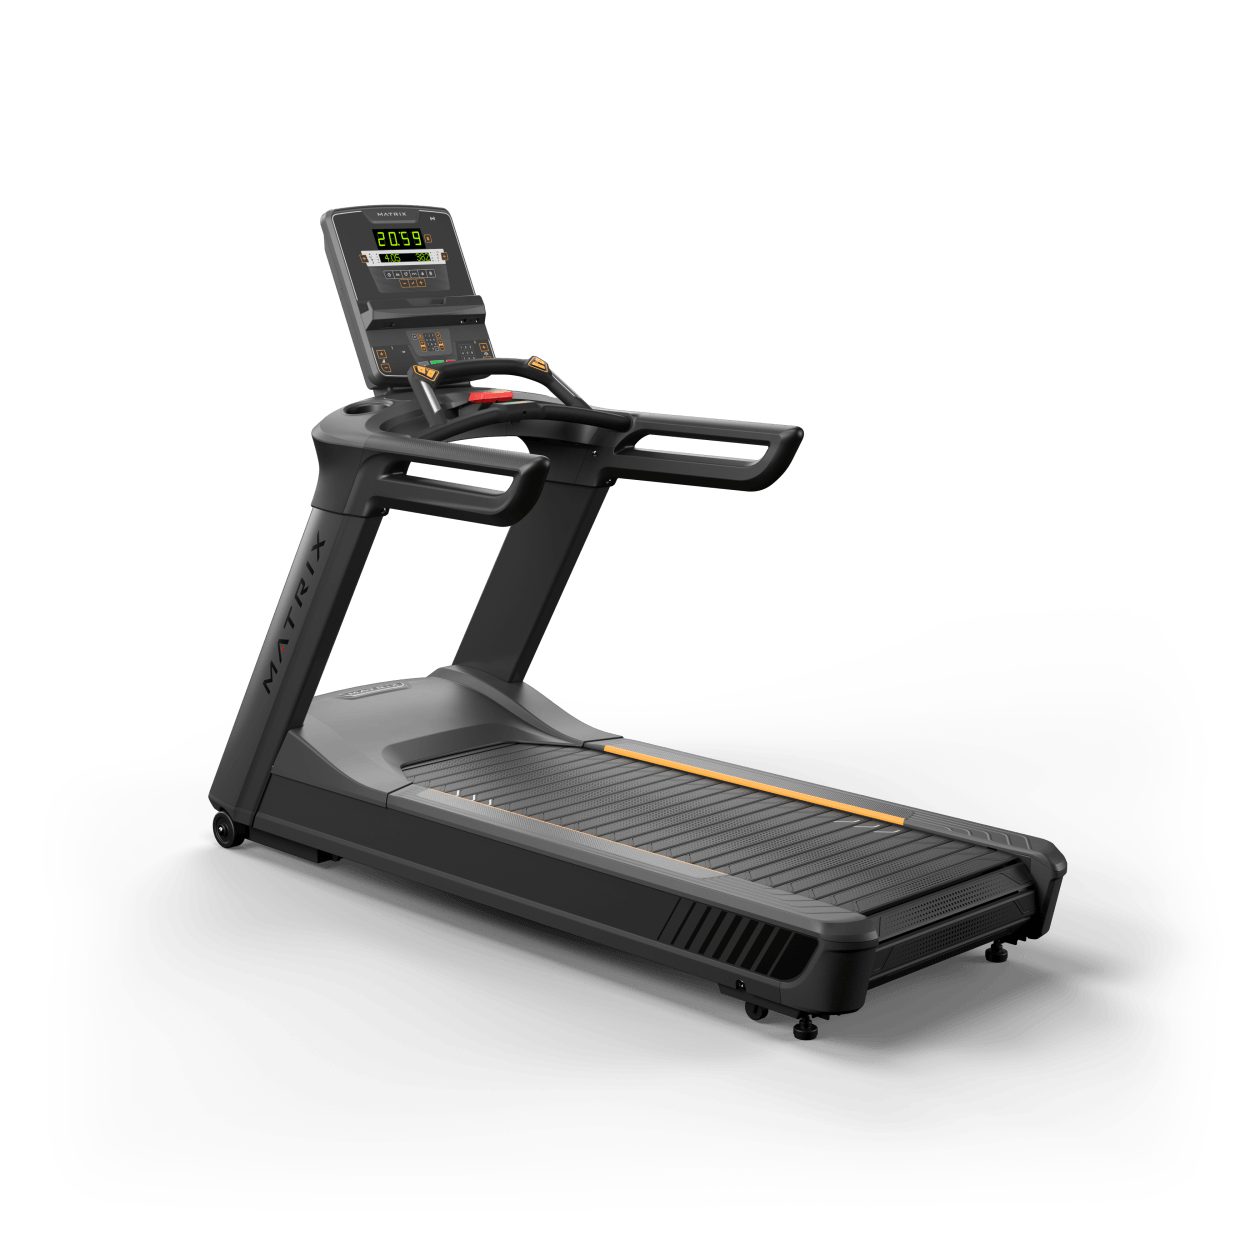 Matrix Fitness Performance Plus Treadmill with LED Console full view | Fitness Experience